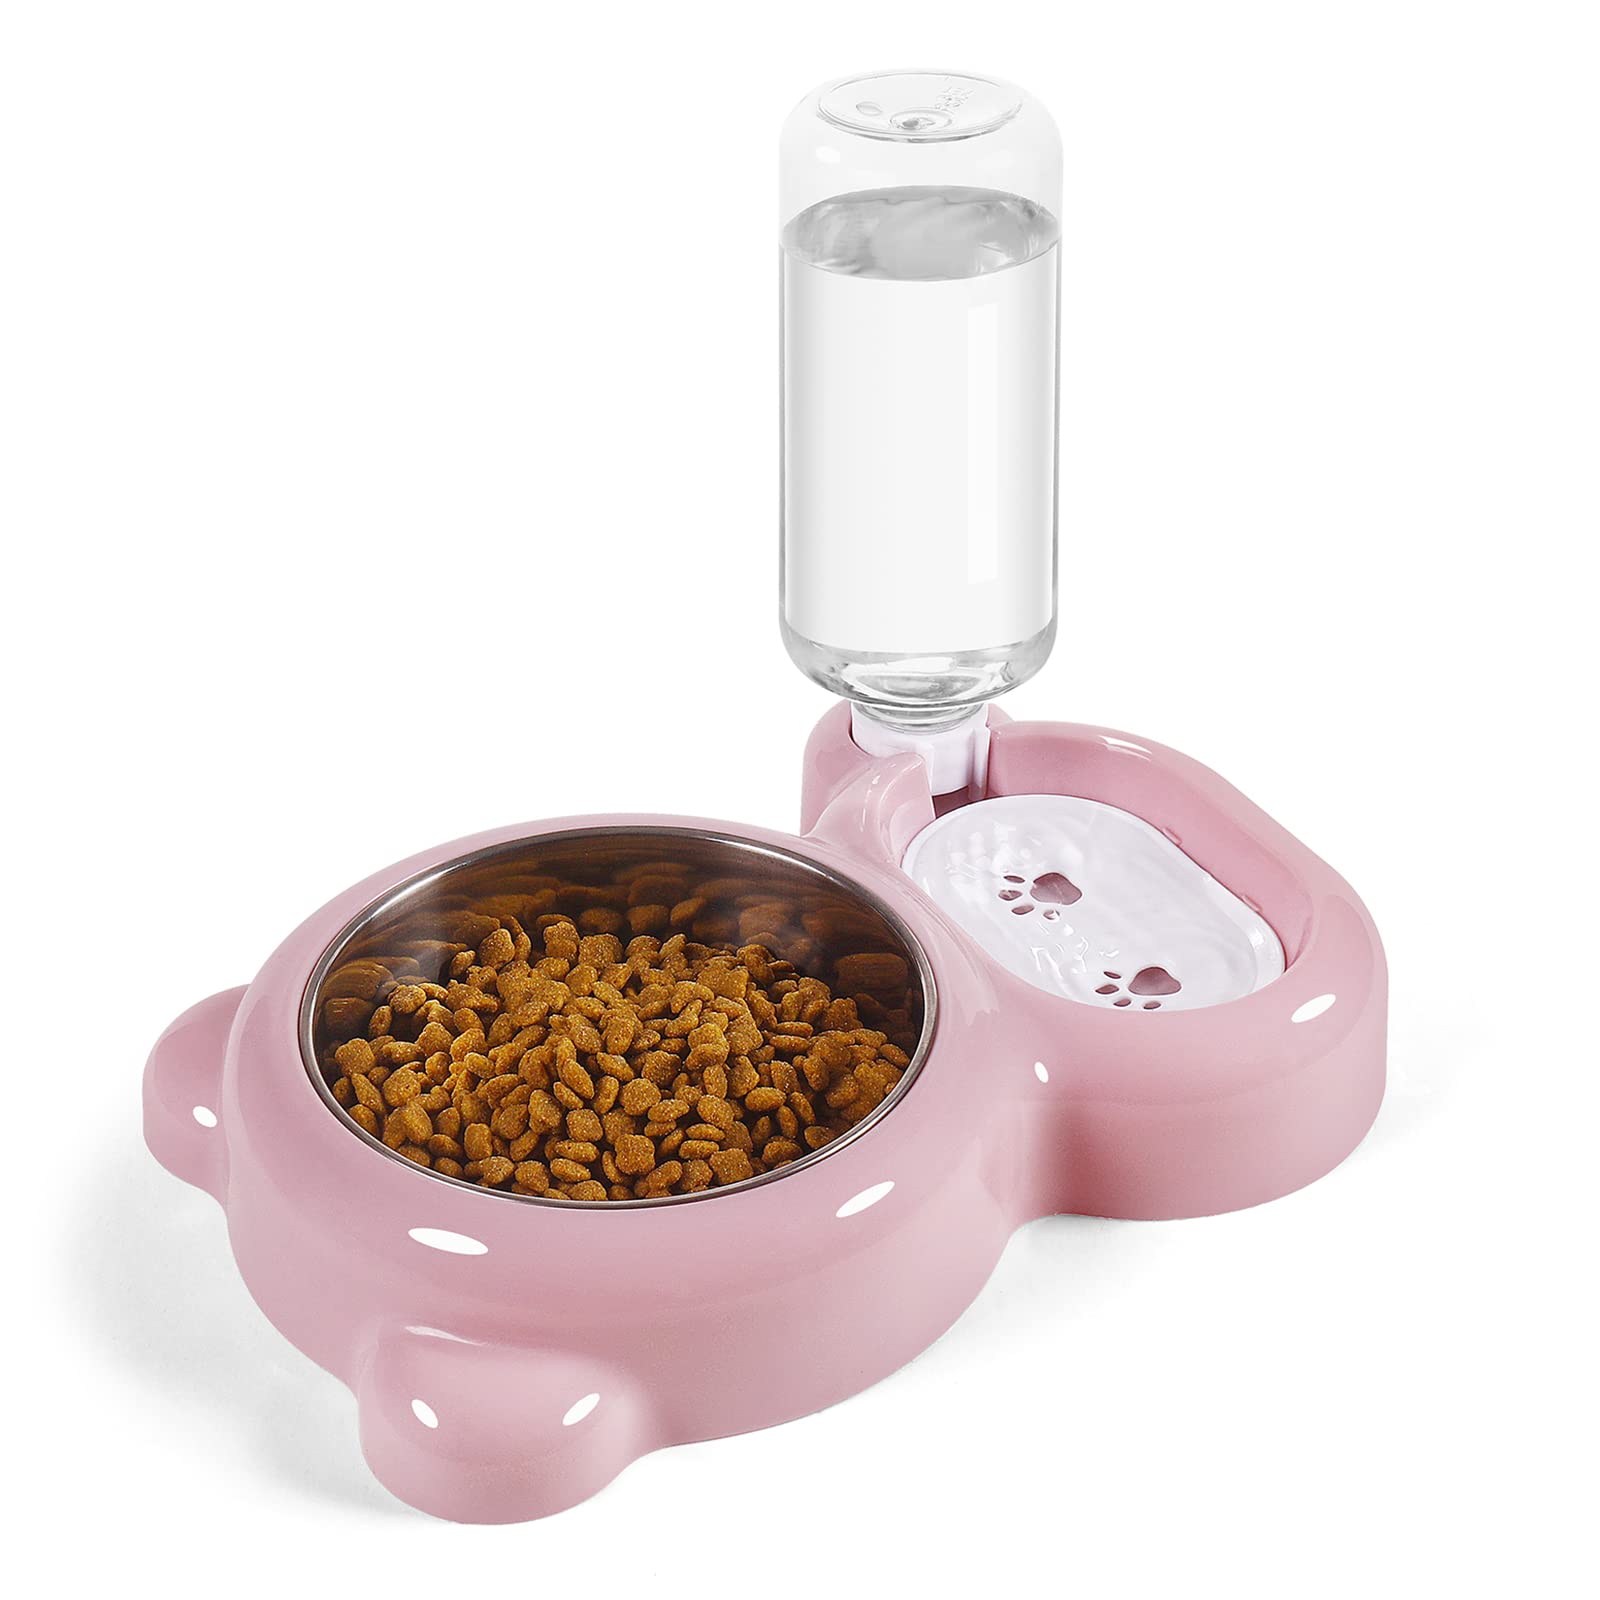 Azwraith Double Dog Cat Bowls, Pet Water and Food Bowl Set with Automatic  Water Dispenser Bottle Detachable Stainless Steel Bowl for Small Dogs and  Cats Kitten Puppy Rabbit Bunny Pink